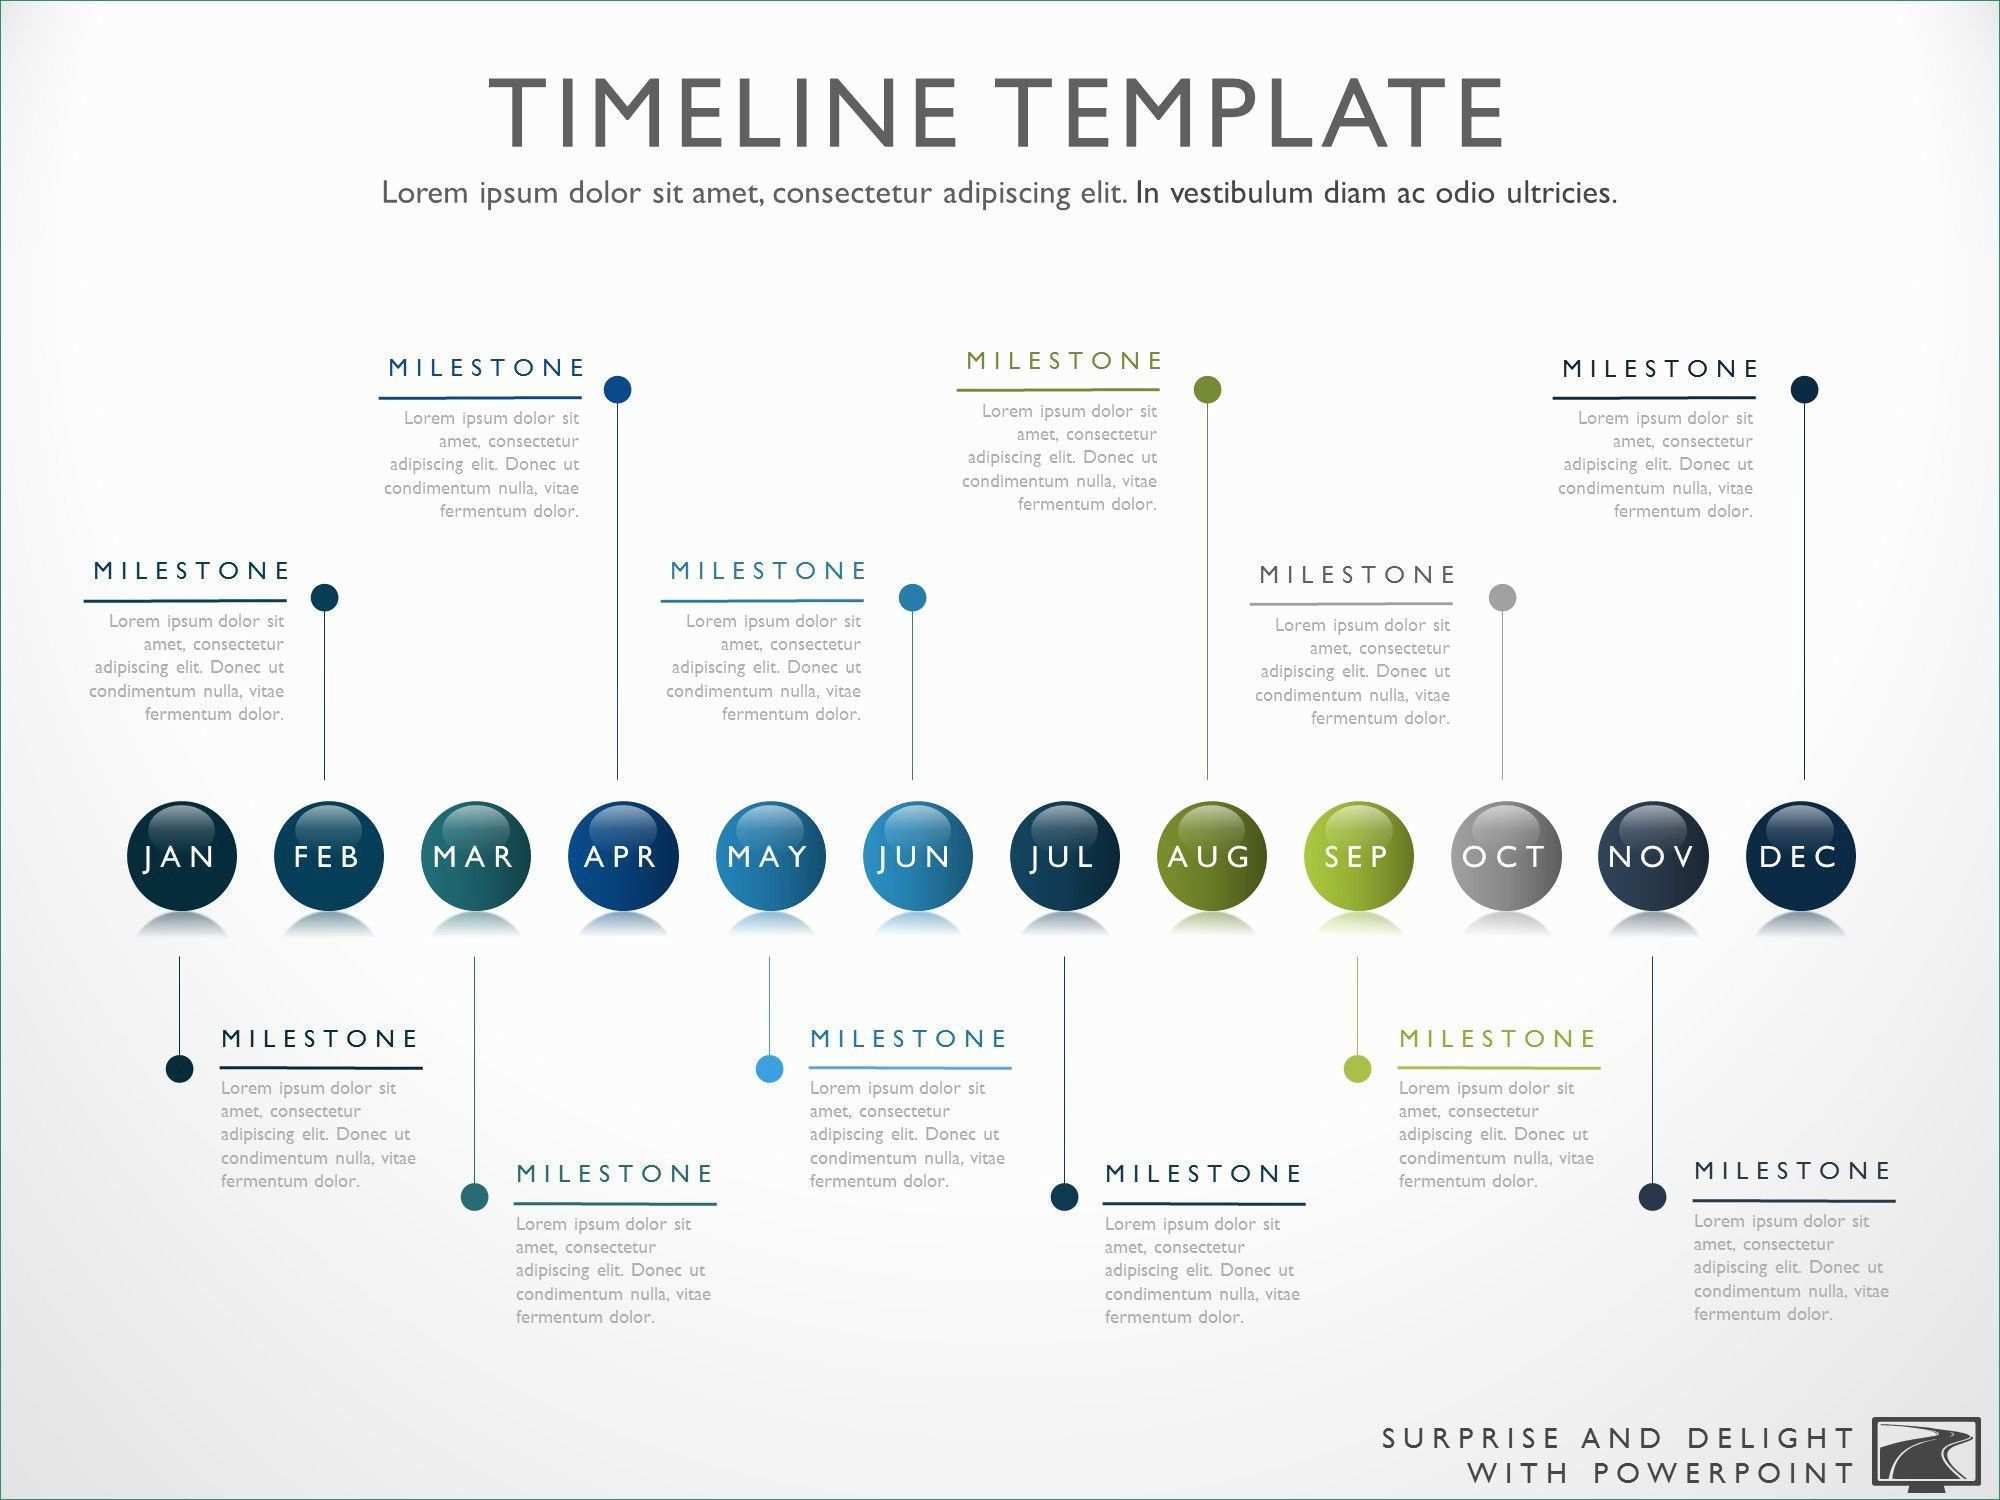 Powerpoint Timeline Template Free Cool Timeline Template Powerpoint Free Microsoft Powerpoint Timeline Template Free Timeline Design Project Timeline Template